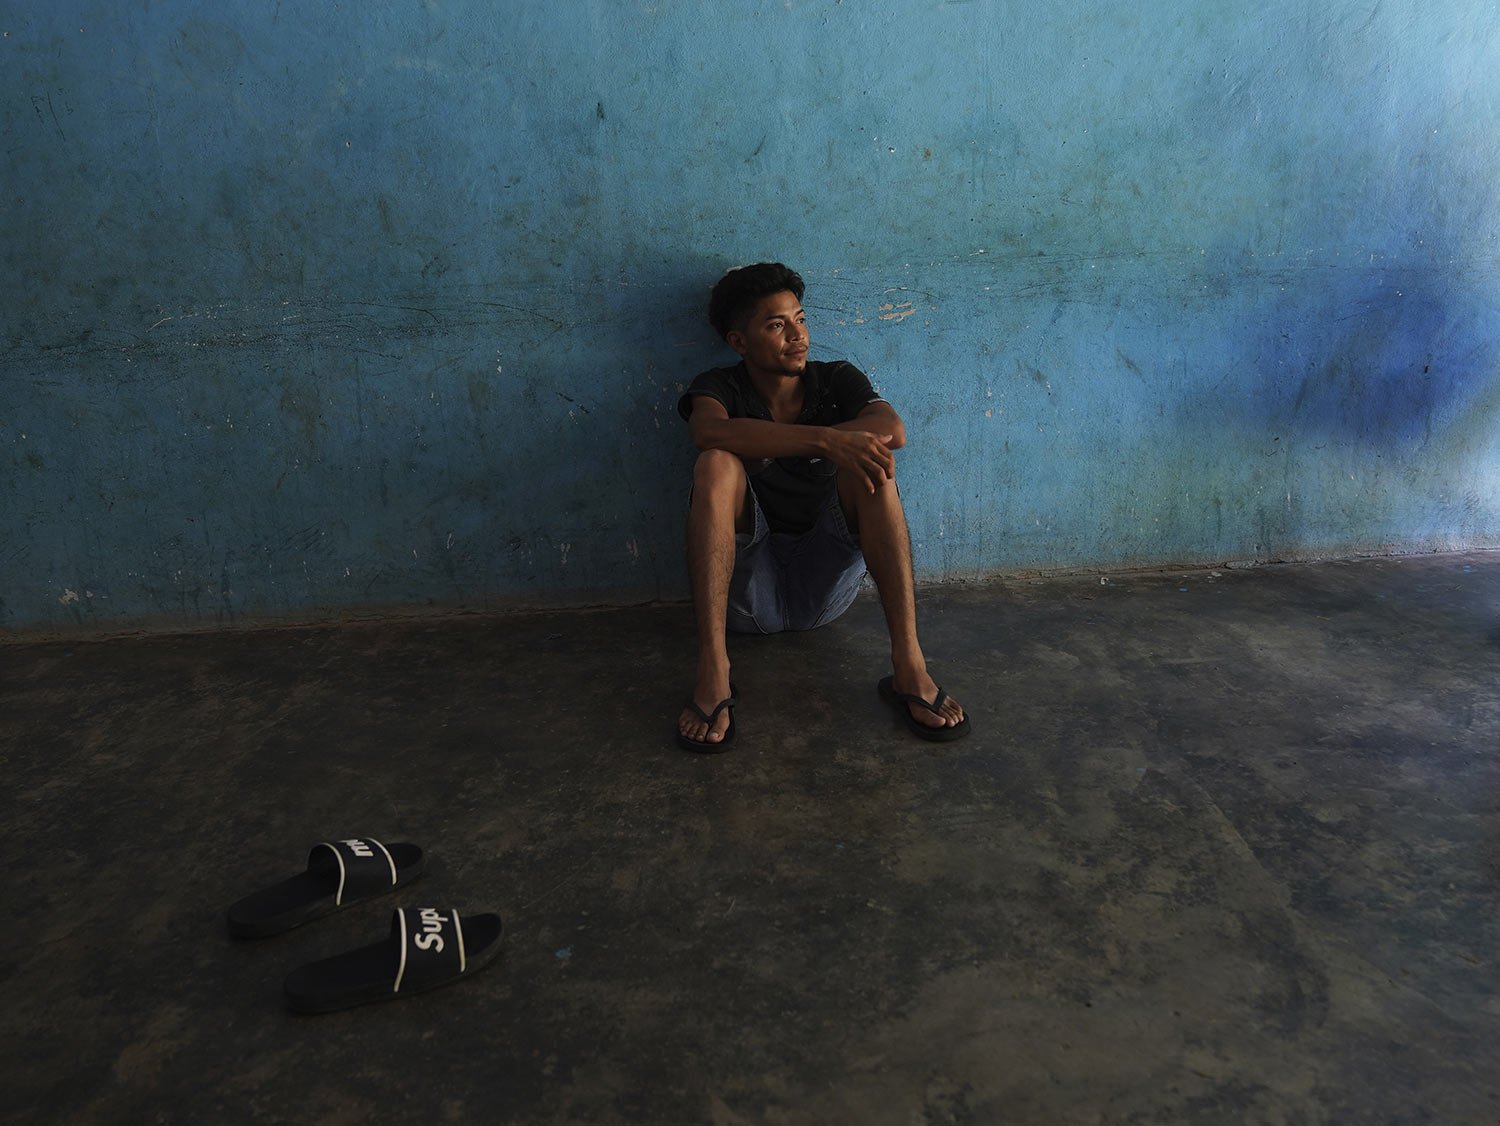  A migrant sits on the floor of a local's home where he is paying to stay while waiting on the Mexican immigration office to accept his application for legal migration documents and give a him "safe passage" permit in Tapachula, Chiapas state, Mexico